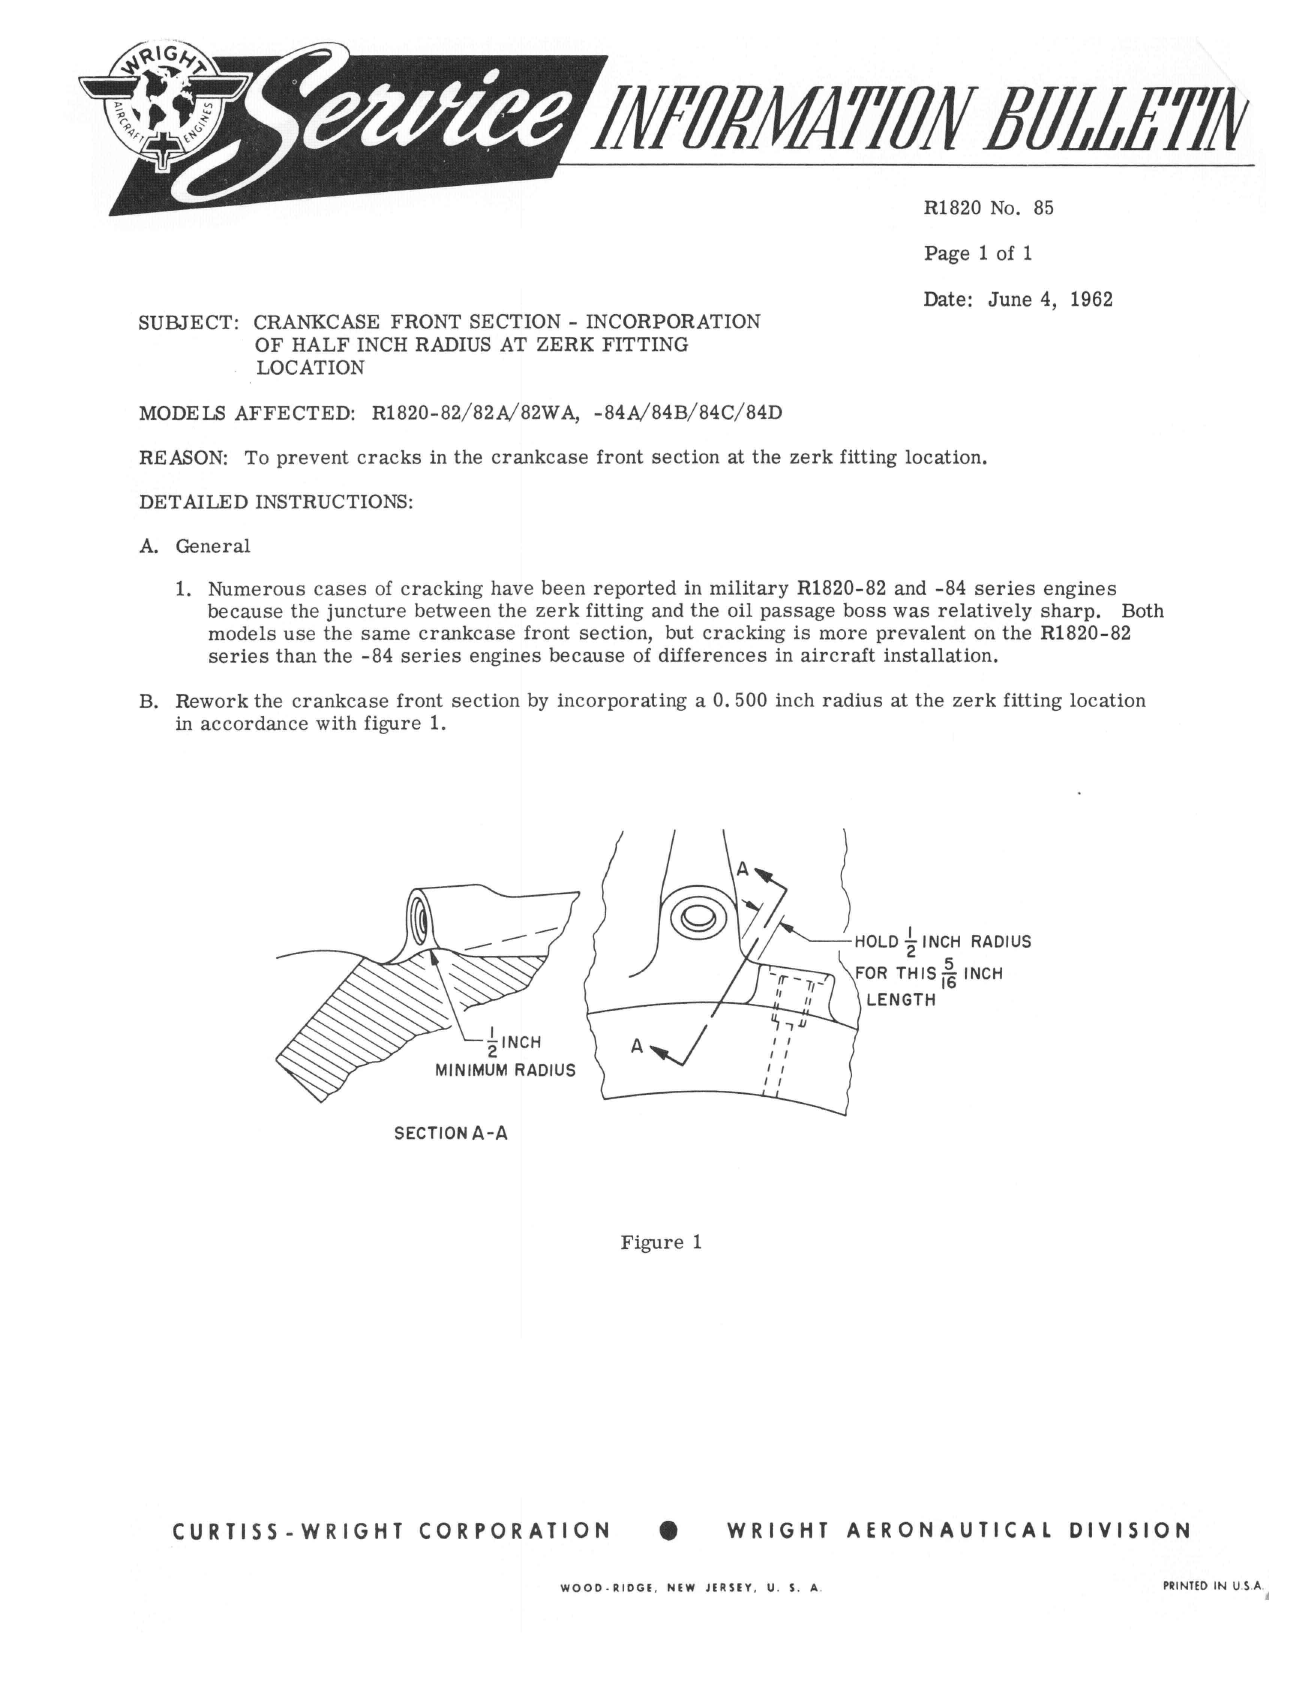 Sample page 1 from AirCorps Library document: Crankcase Front Sec. - Incorporation of 1/2 Inch Radius at Zerk Fitting Location